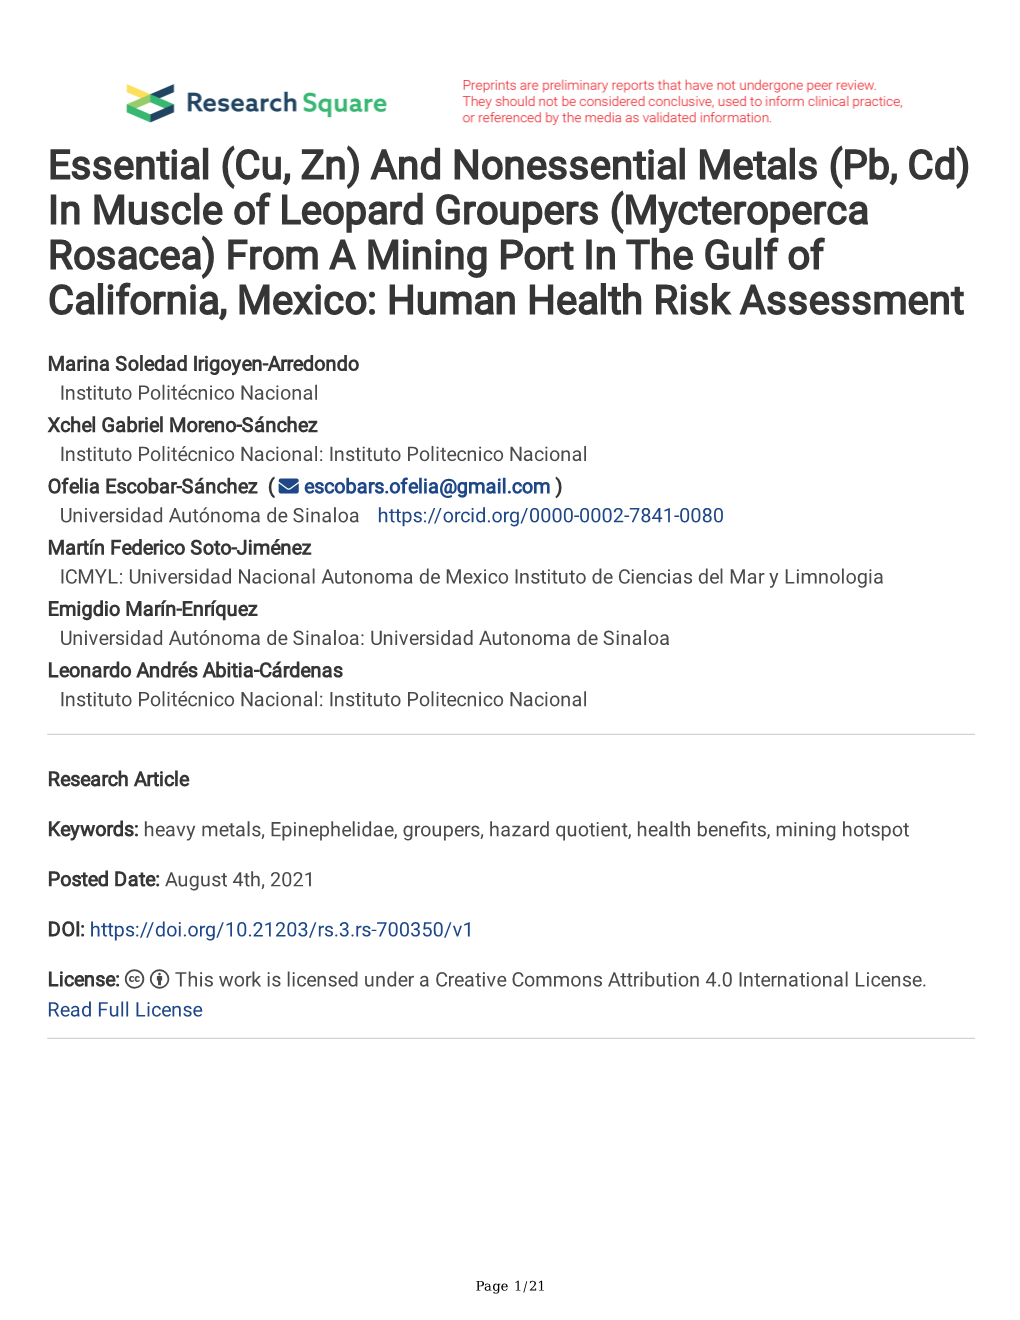 In Muscle of Leopard Groupers (Mycteroperca Rosacea) from a Mining Port in the Gulf of California, Mexico: Human Health Risk Assessment